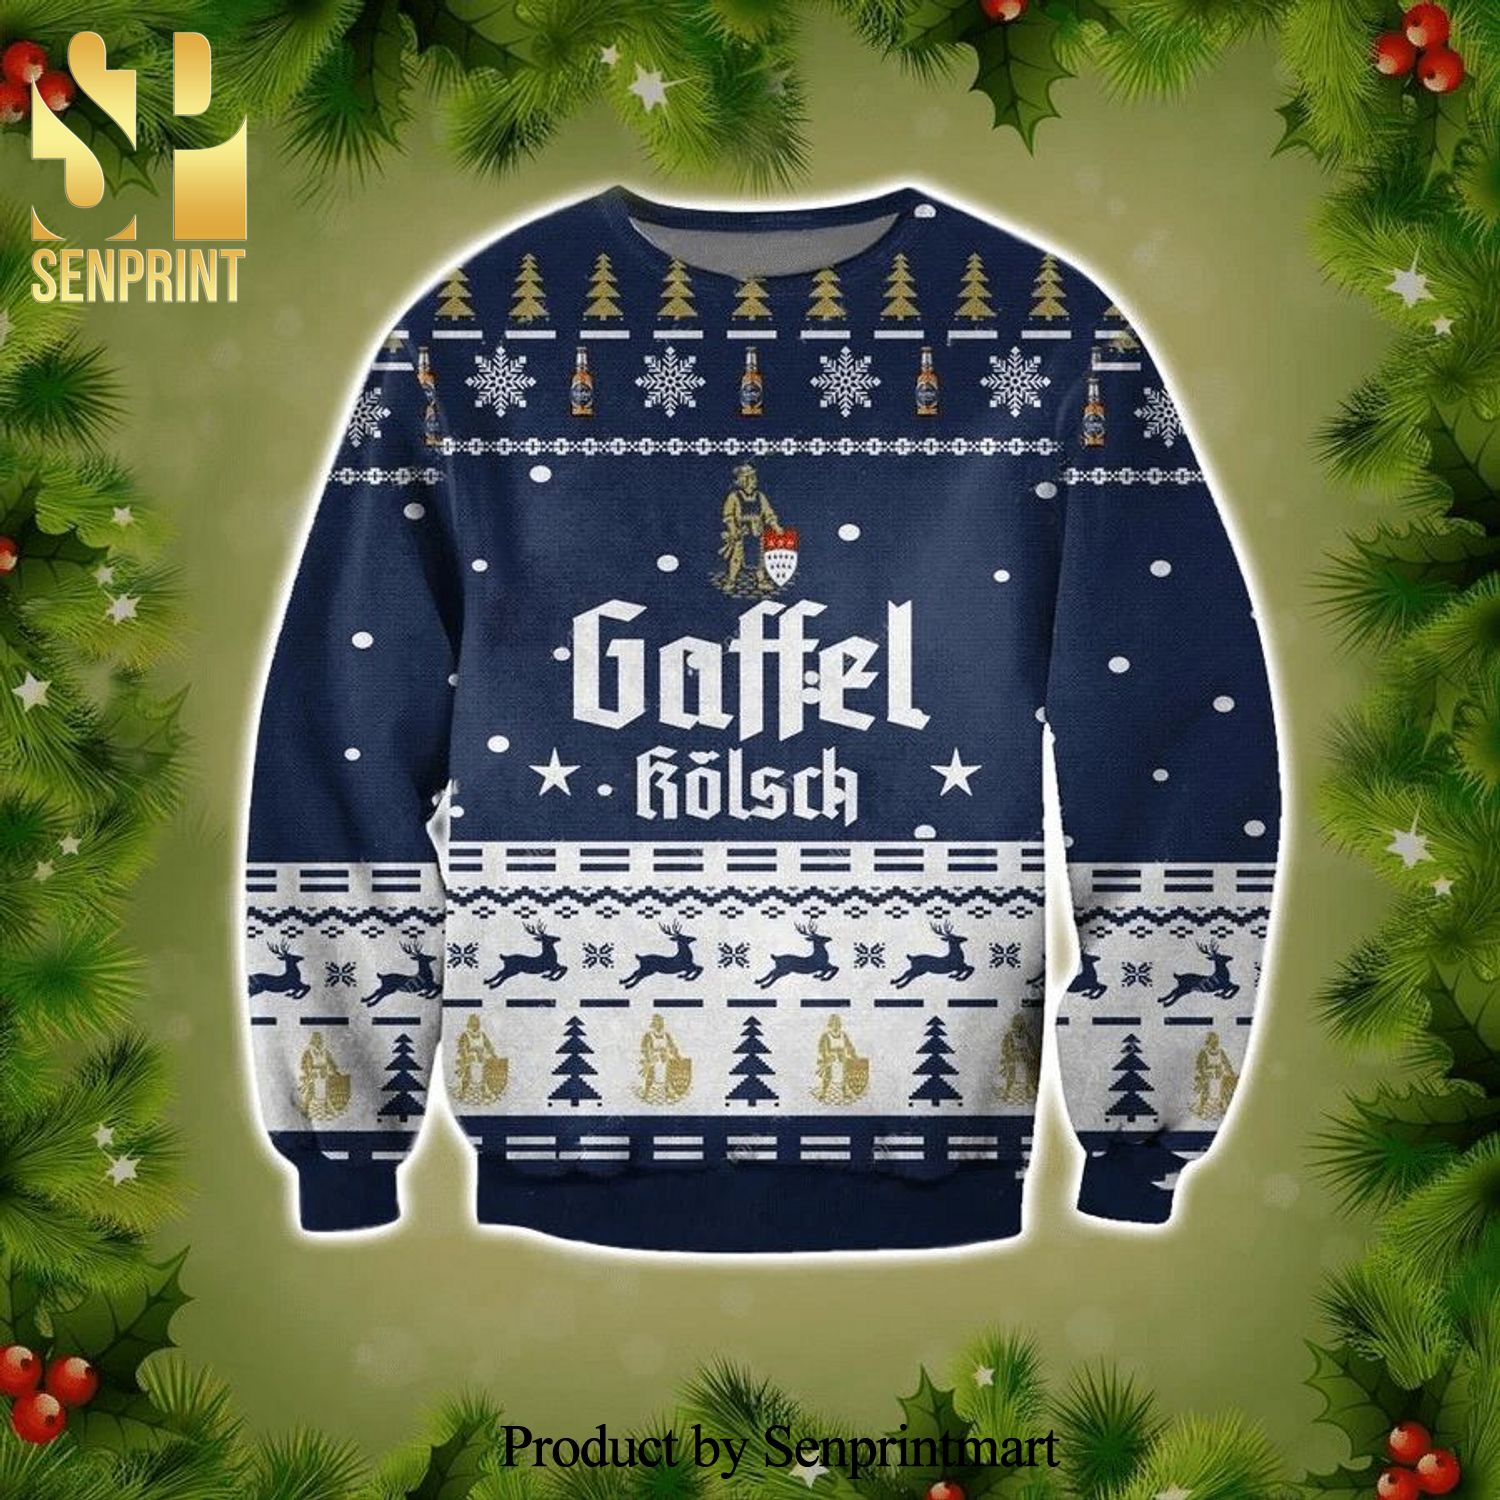 Gaffel Kolsch Beer Knitted Ugly Christmas Sweater